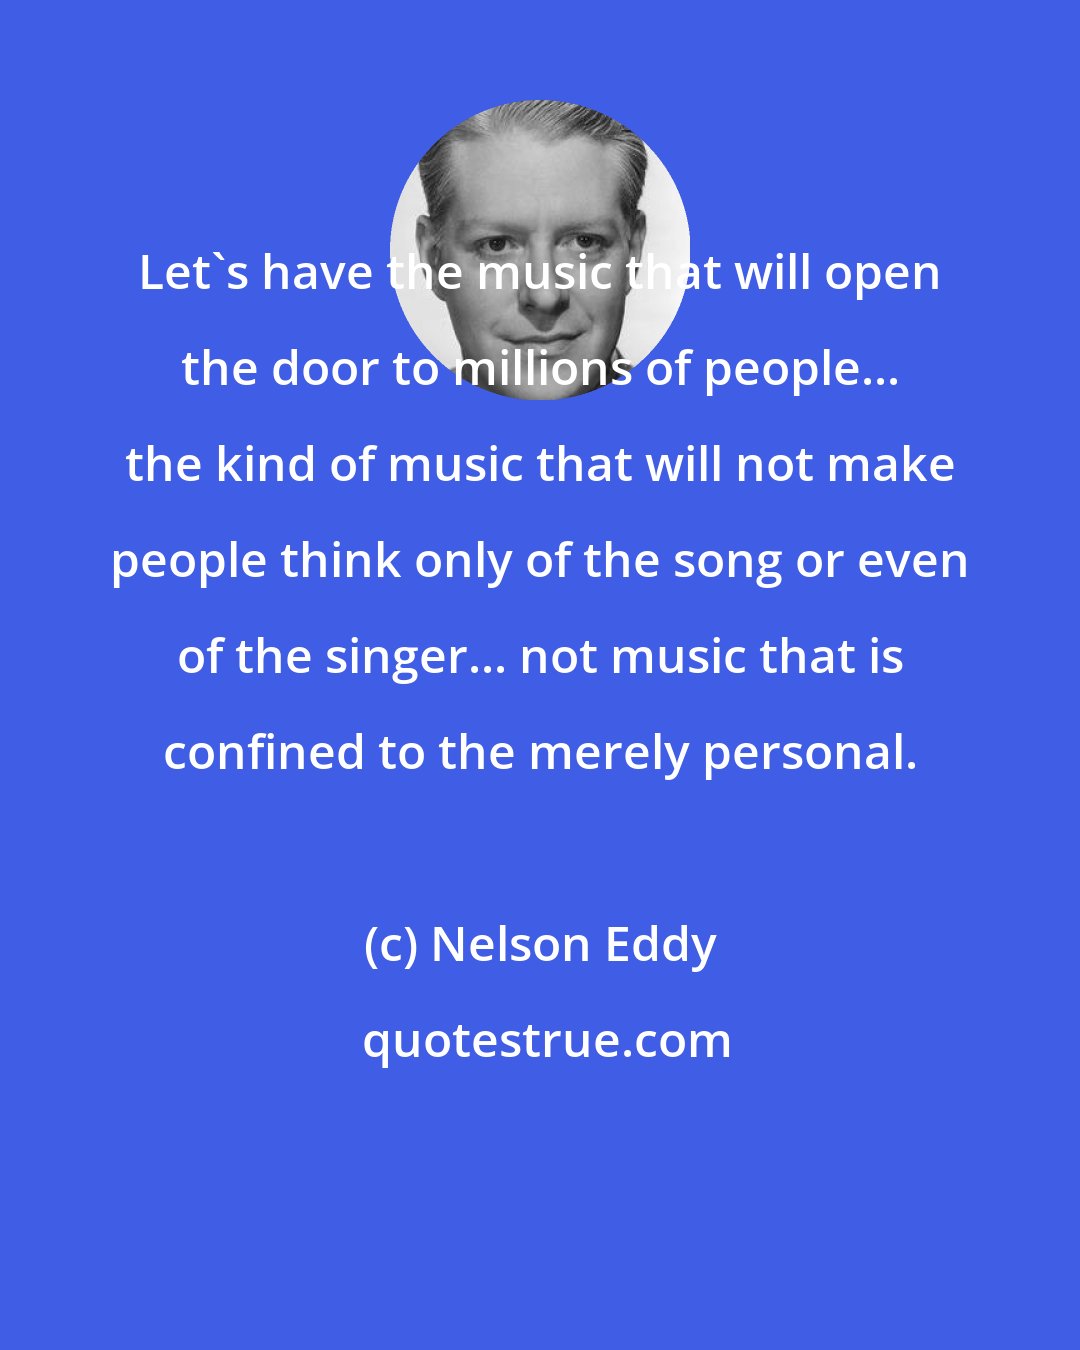 Nelson Eddy: Let's have the music that will open the door to millions of people... the kind of music that will not make people think only of the song or even of the singer... not music that is confined to the merely personal.